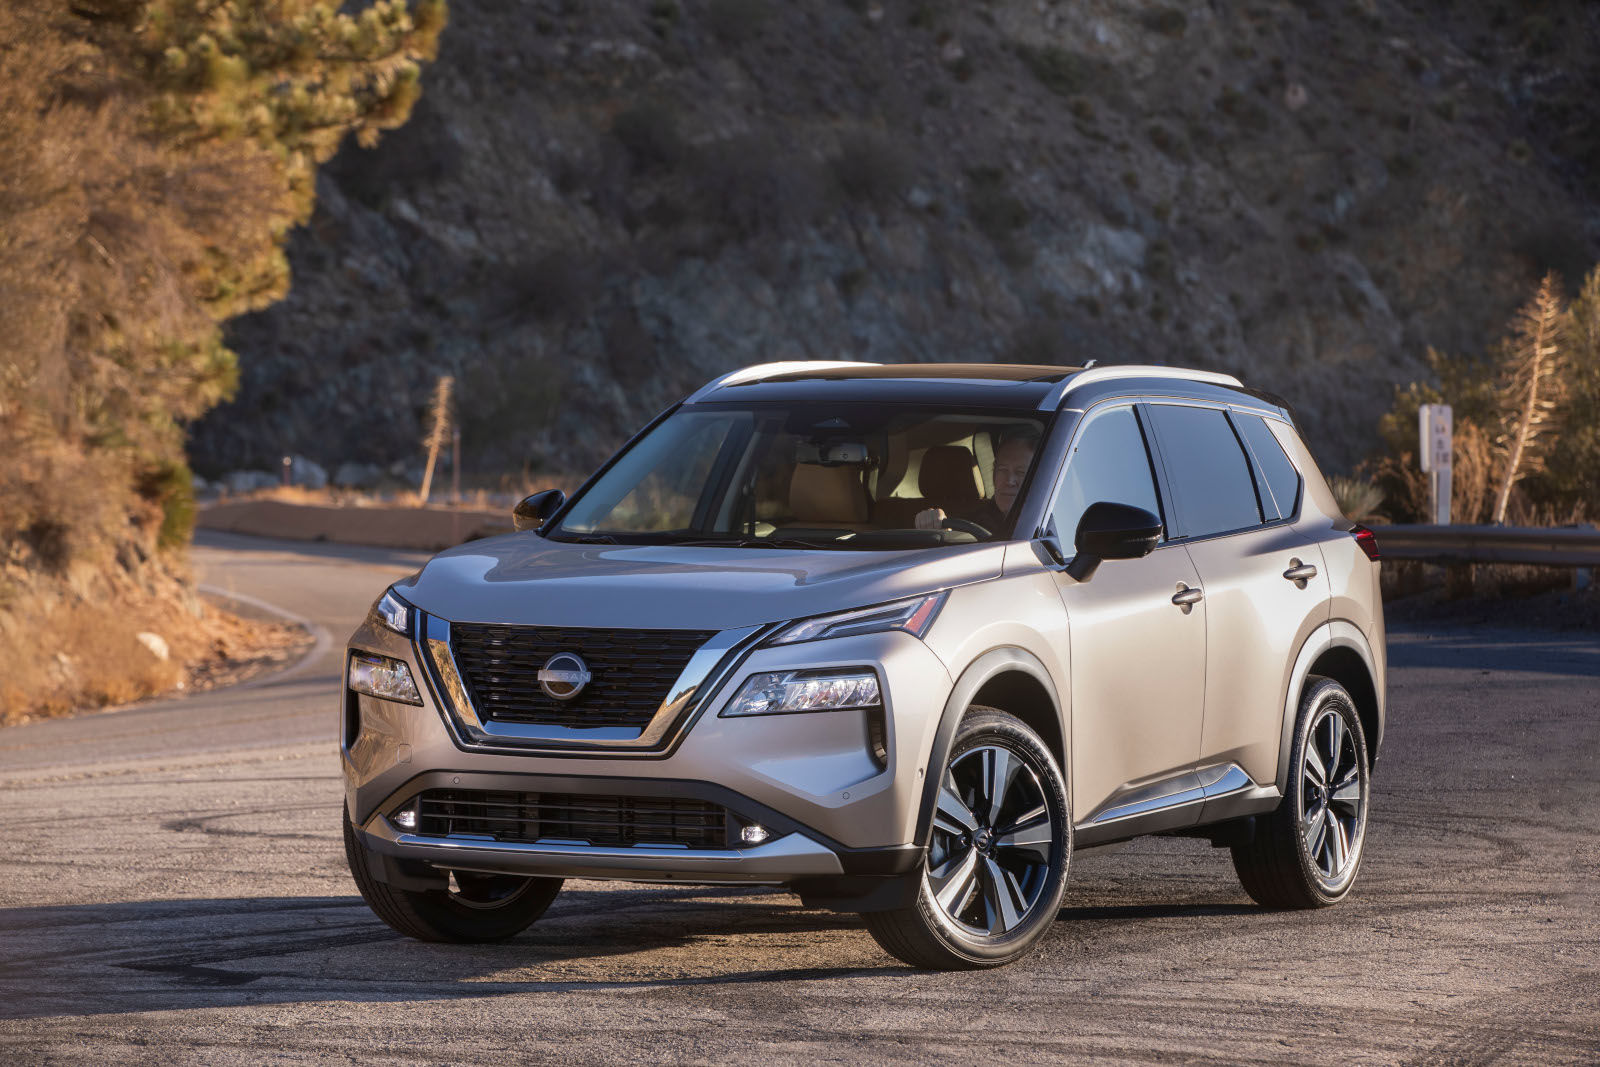 Three reasons the 2023 Nissan Rogue stands out from the 2023 Hyundai Tucson